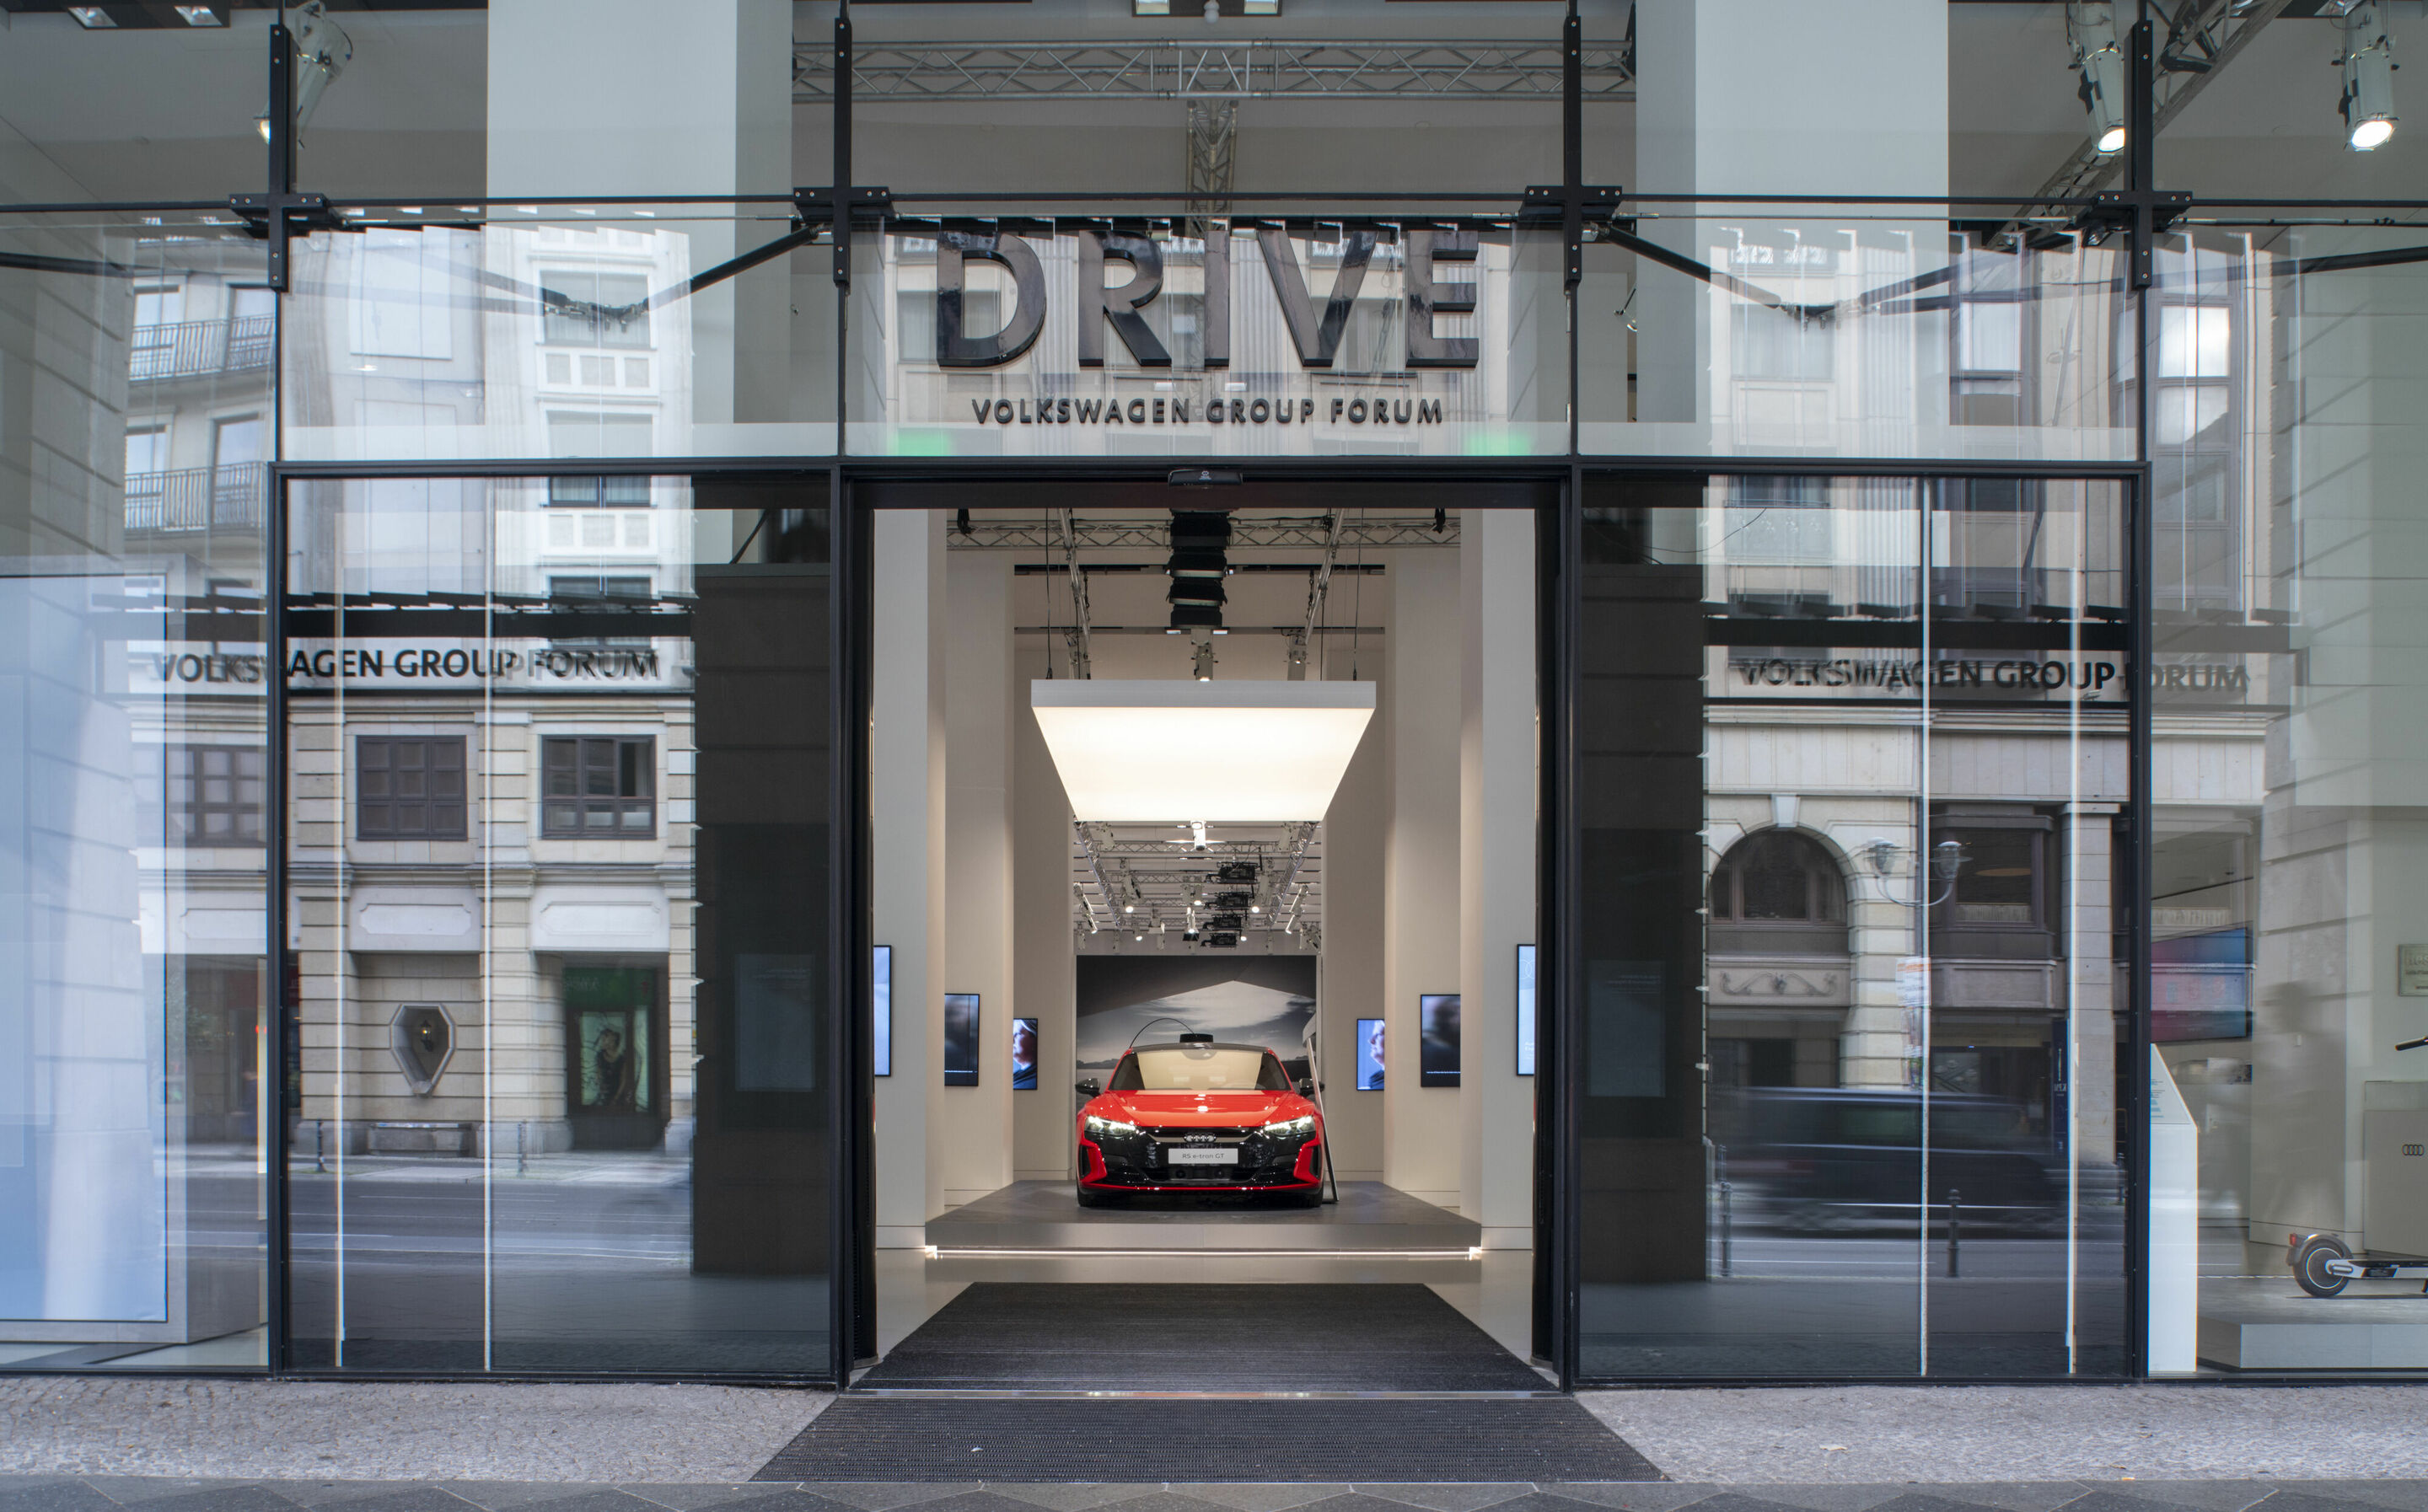 Audi opens a brand exhibition at DRIVE. Volkswagen Group Forum